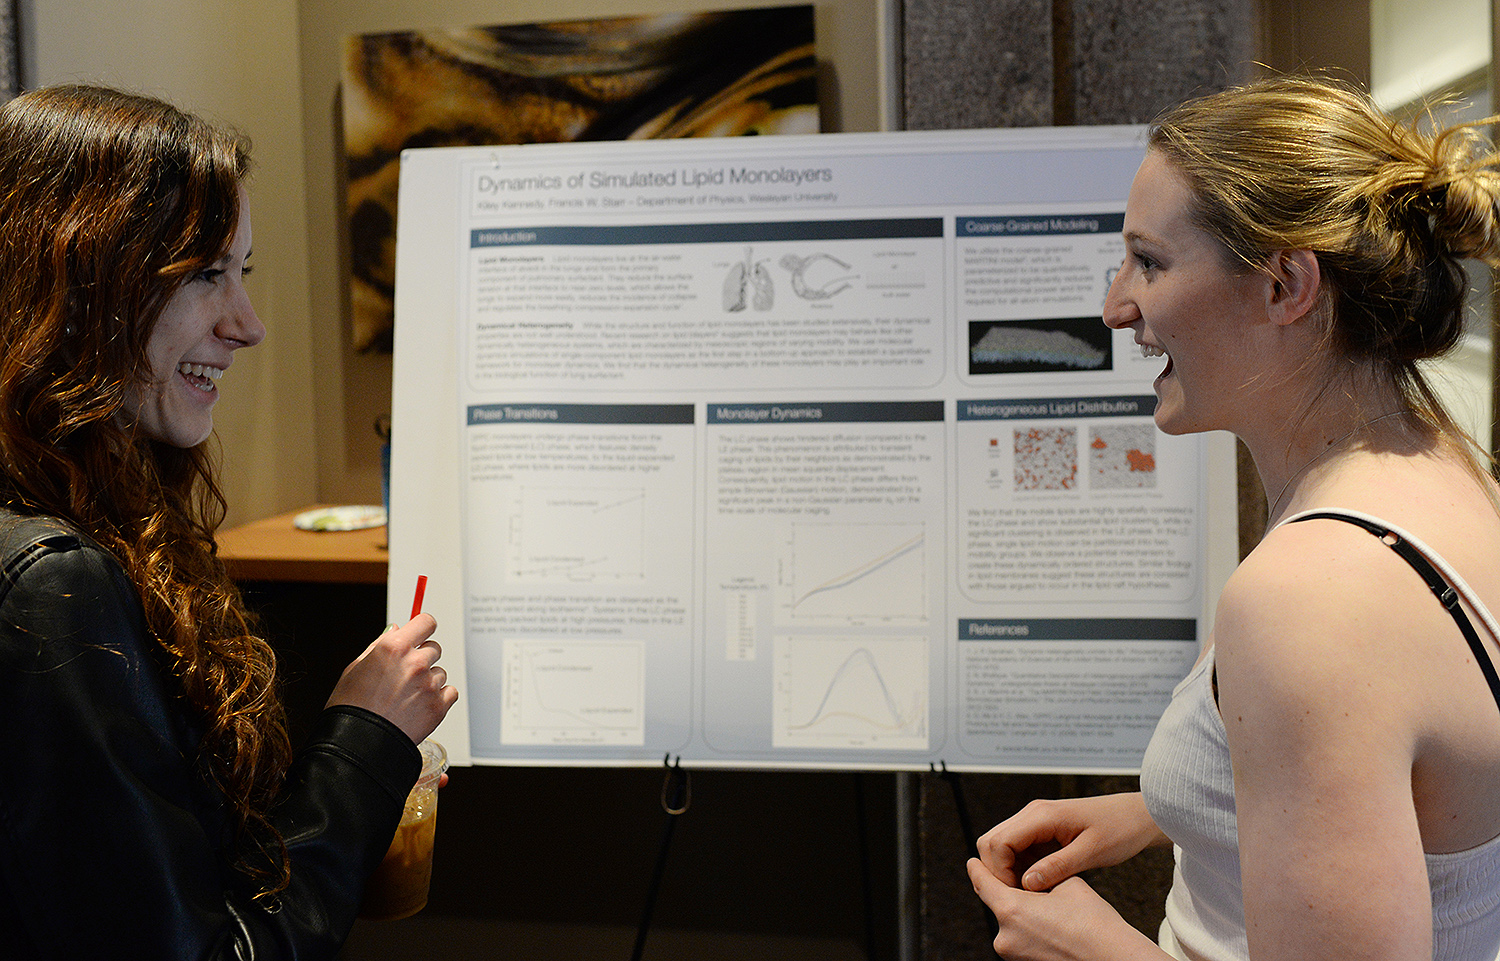 Kiley Kennedy ’16 exhibited her research “Dynamics of Simulated Lipid Monolayers.” Francis Starr, director of the College of Integrated Sciences, professor of physics, served as her faculty advisor. 